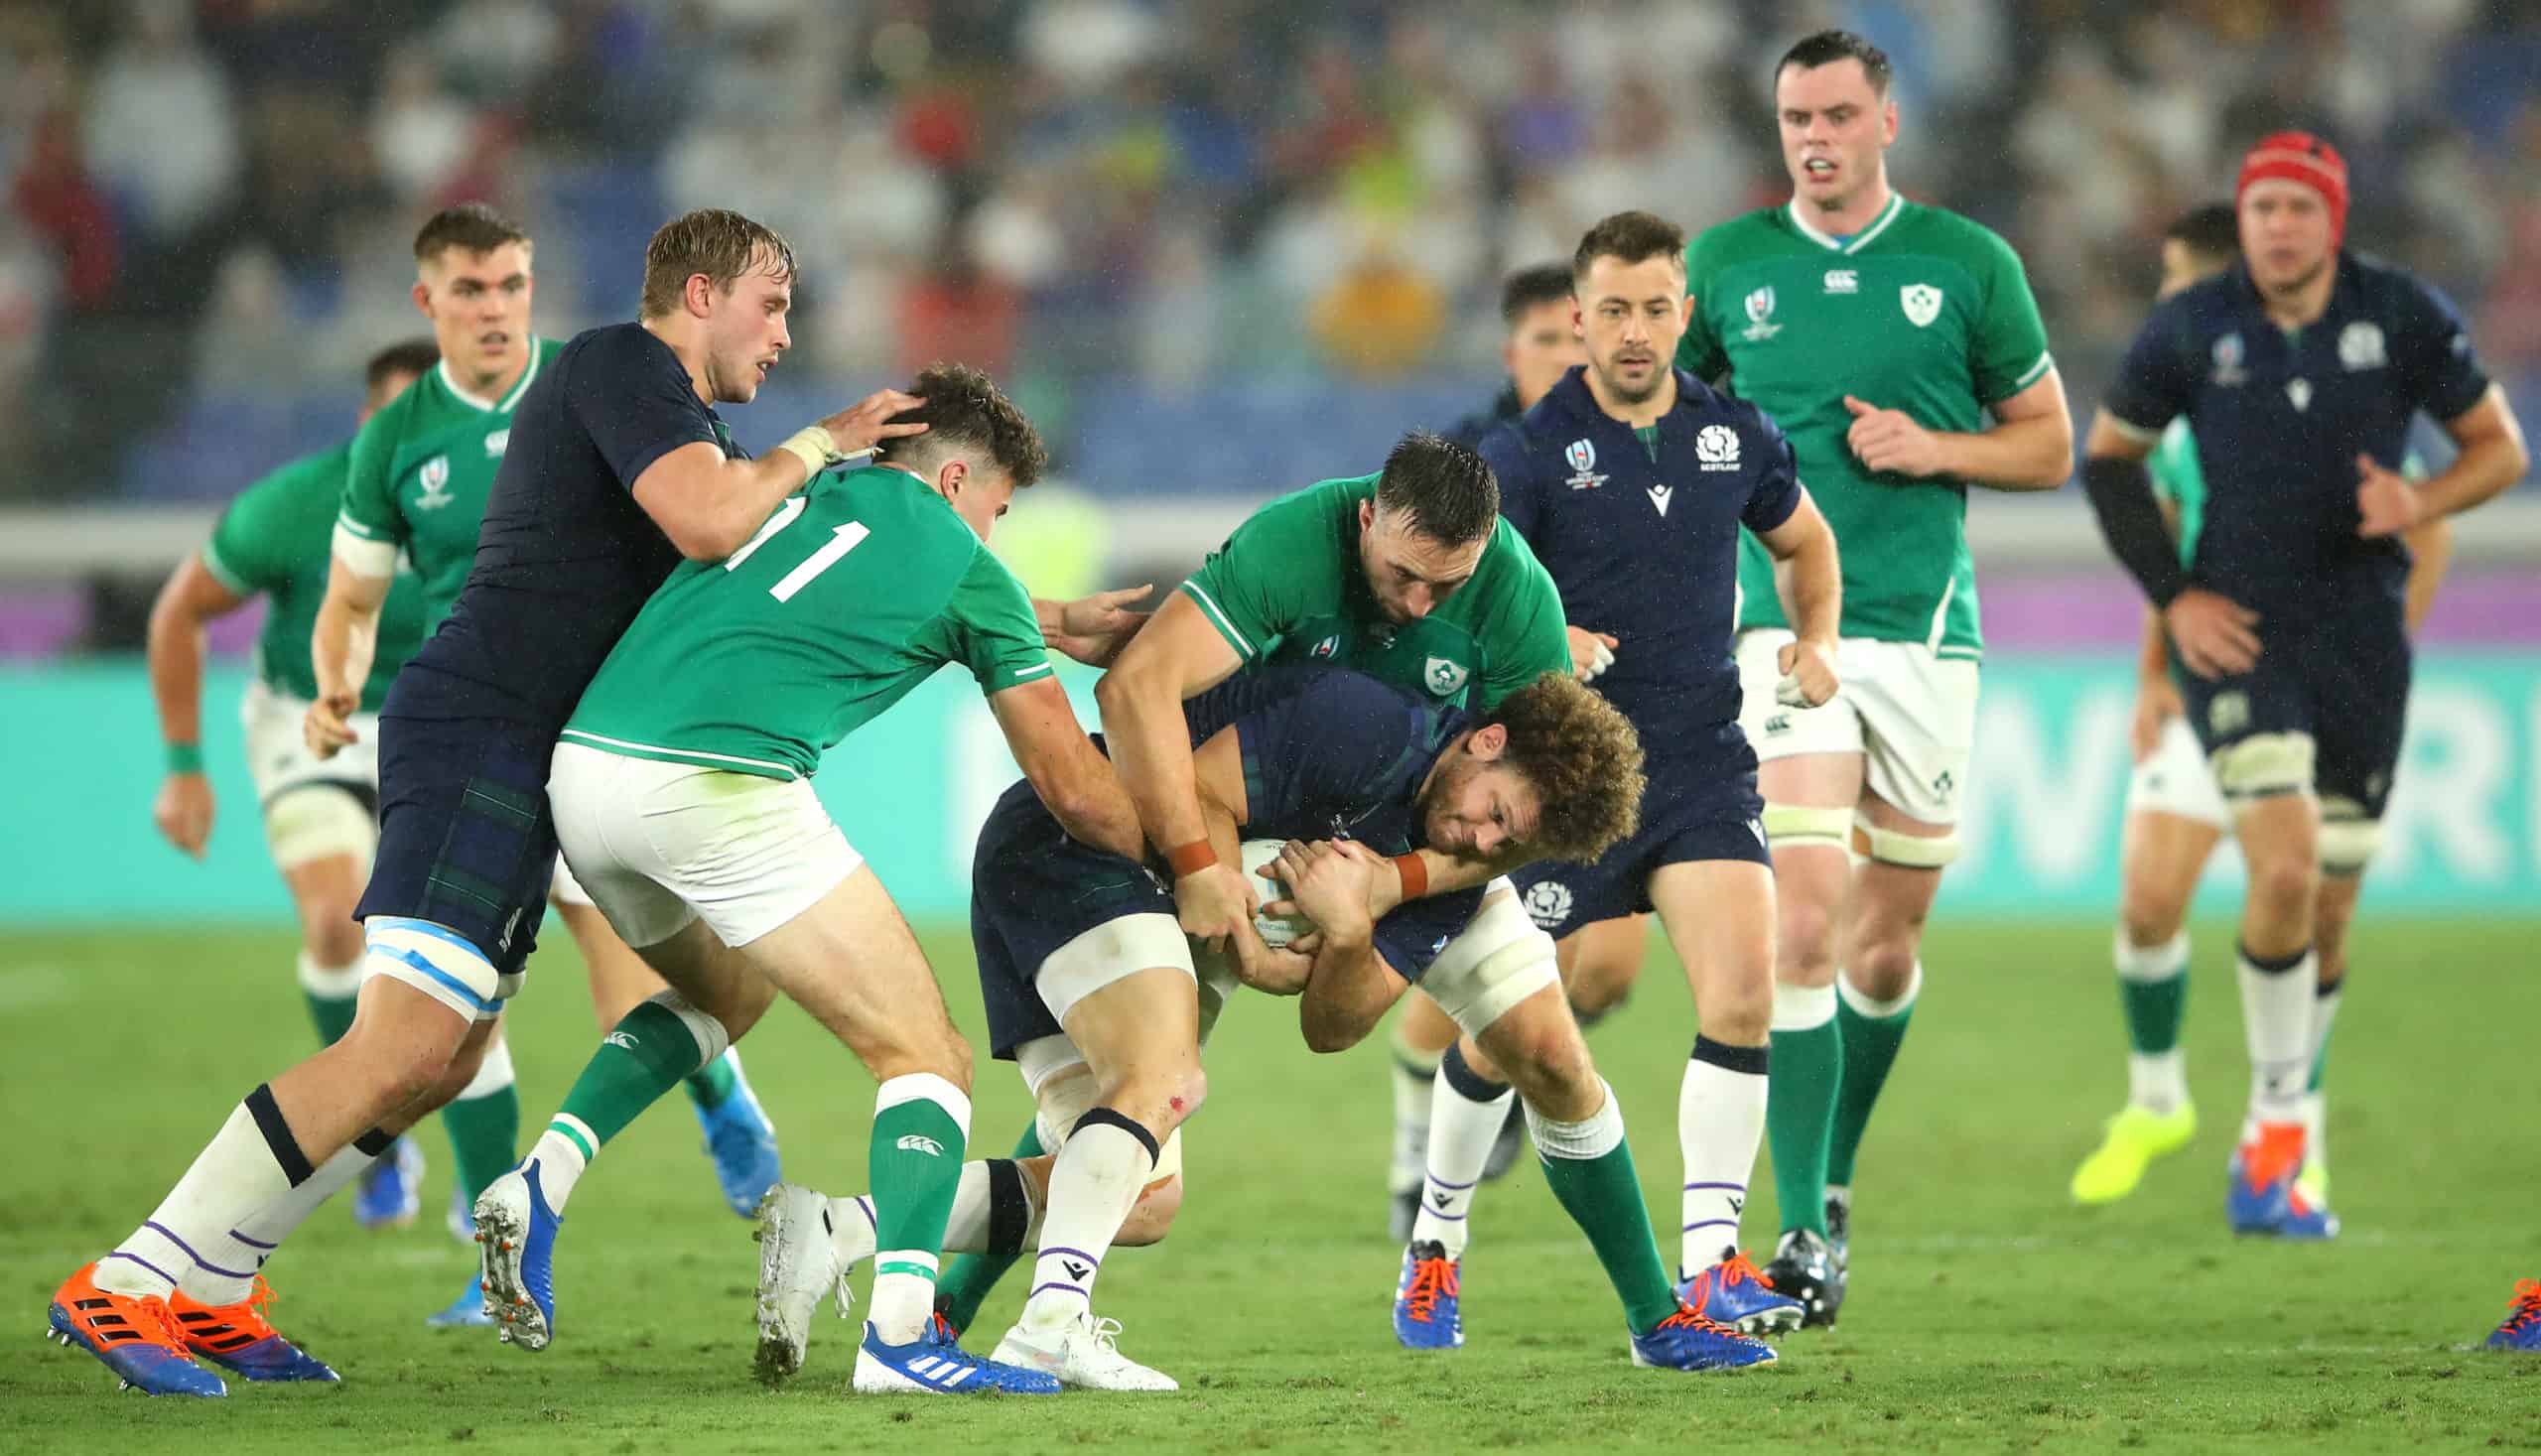 Six Nations Week 5: Ireland retain title on a dramatic Super Saturday